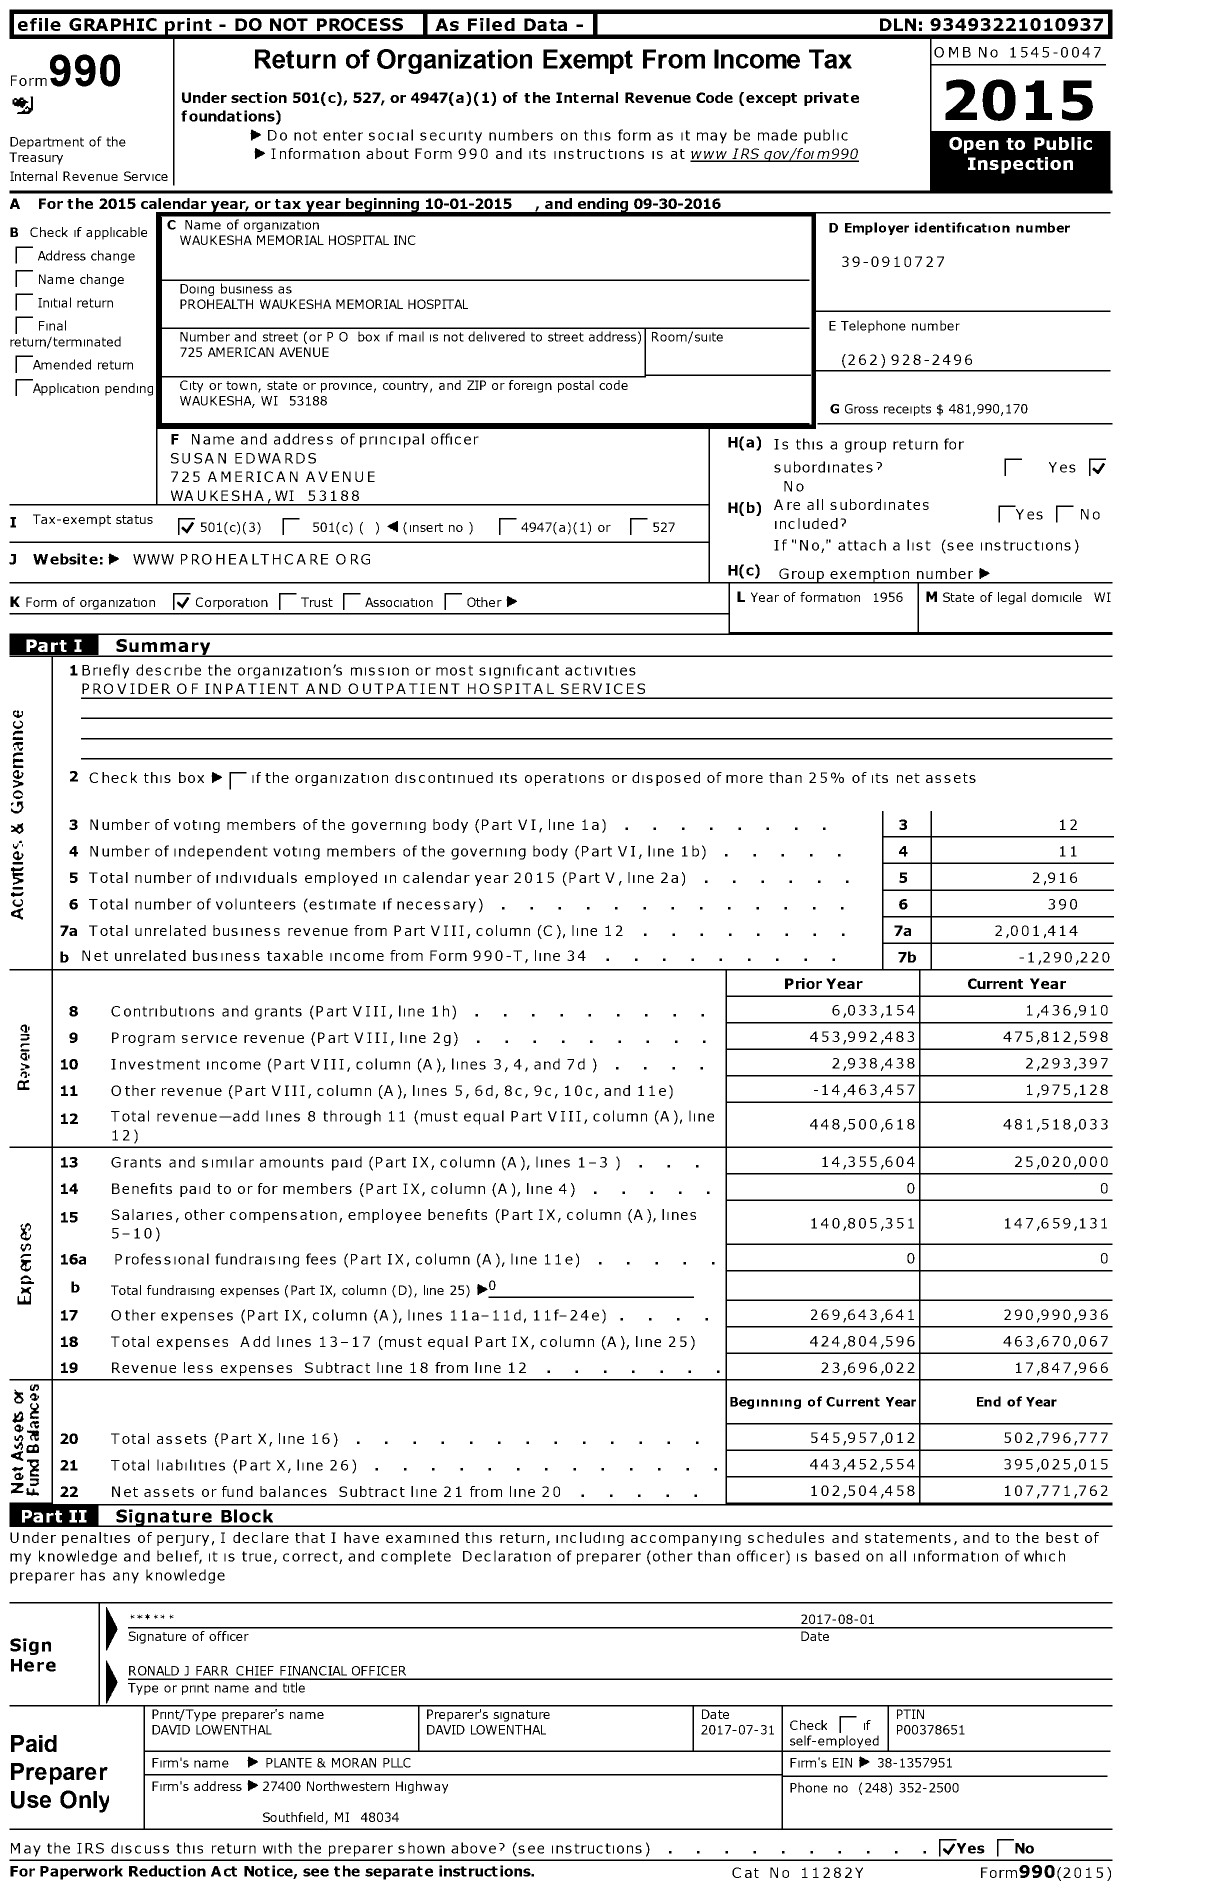 Image of first page of 2015 Form 990 for Prohealth Waukesha Memorial Hospital (WMH)